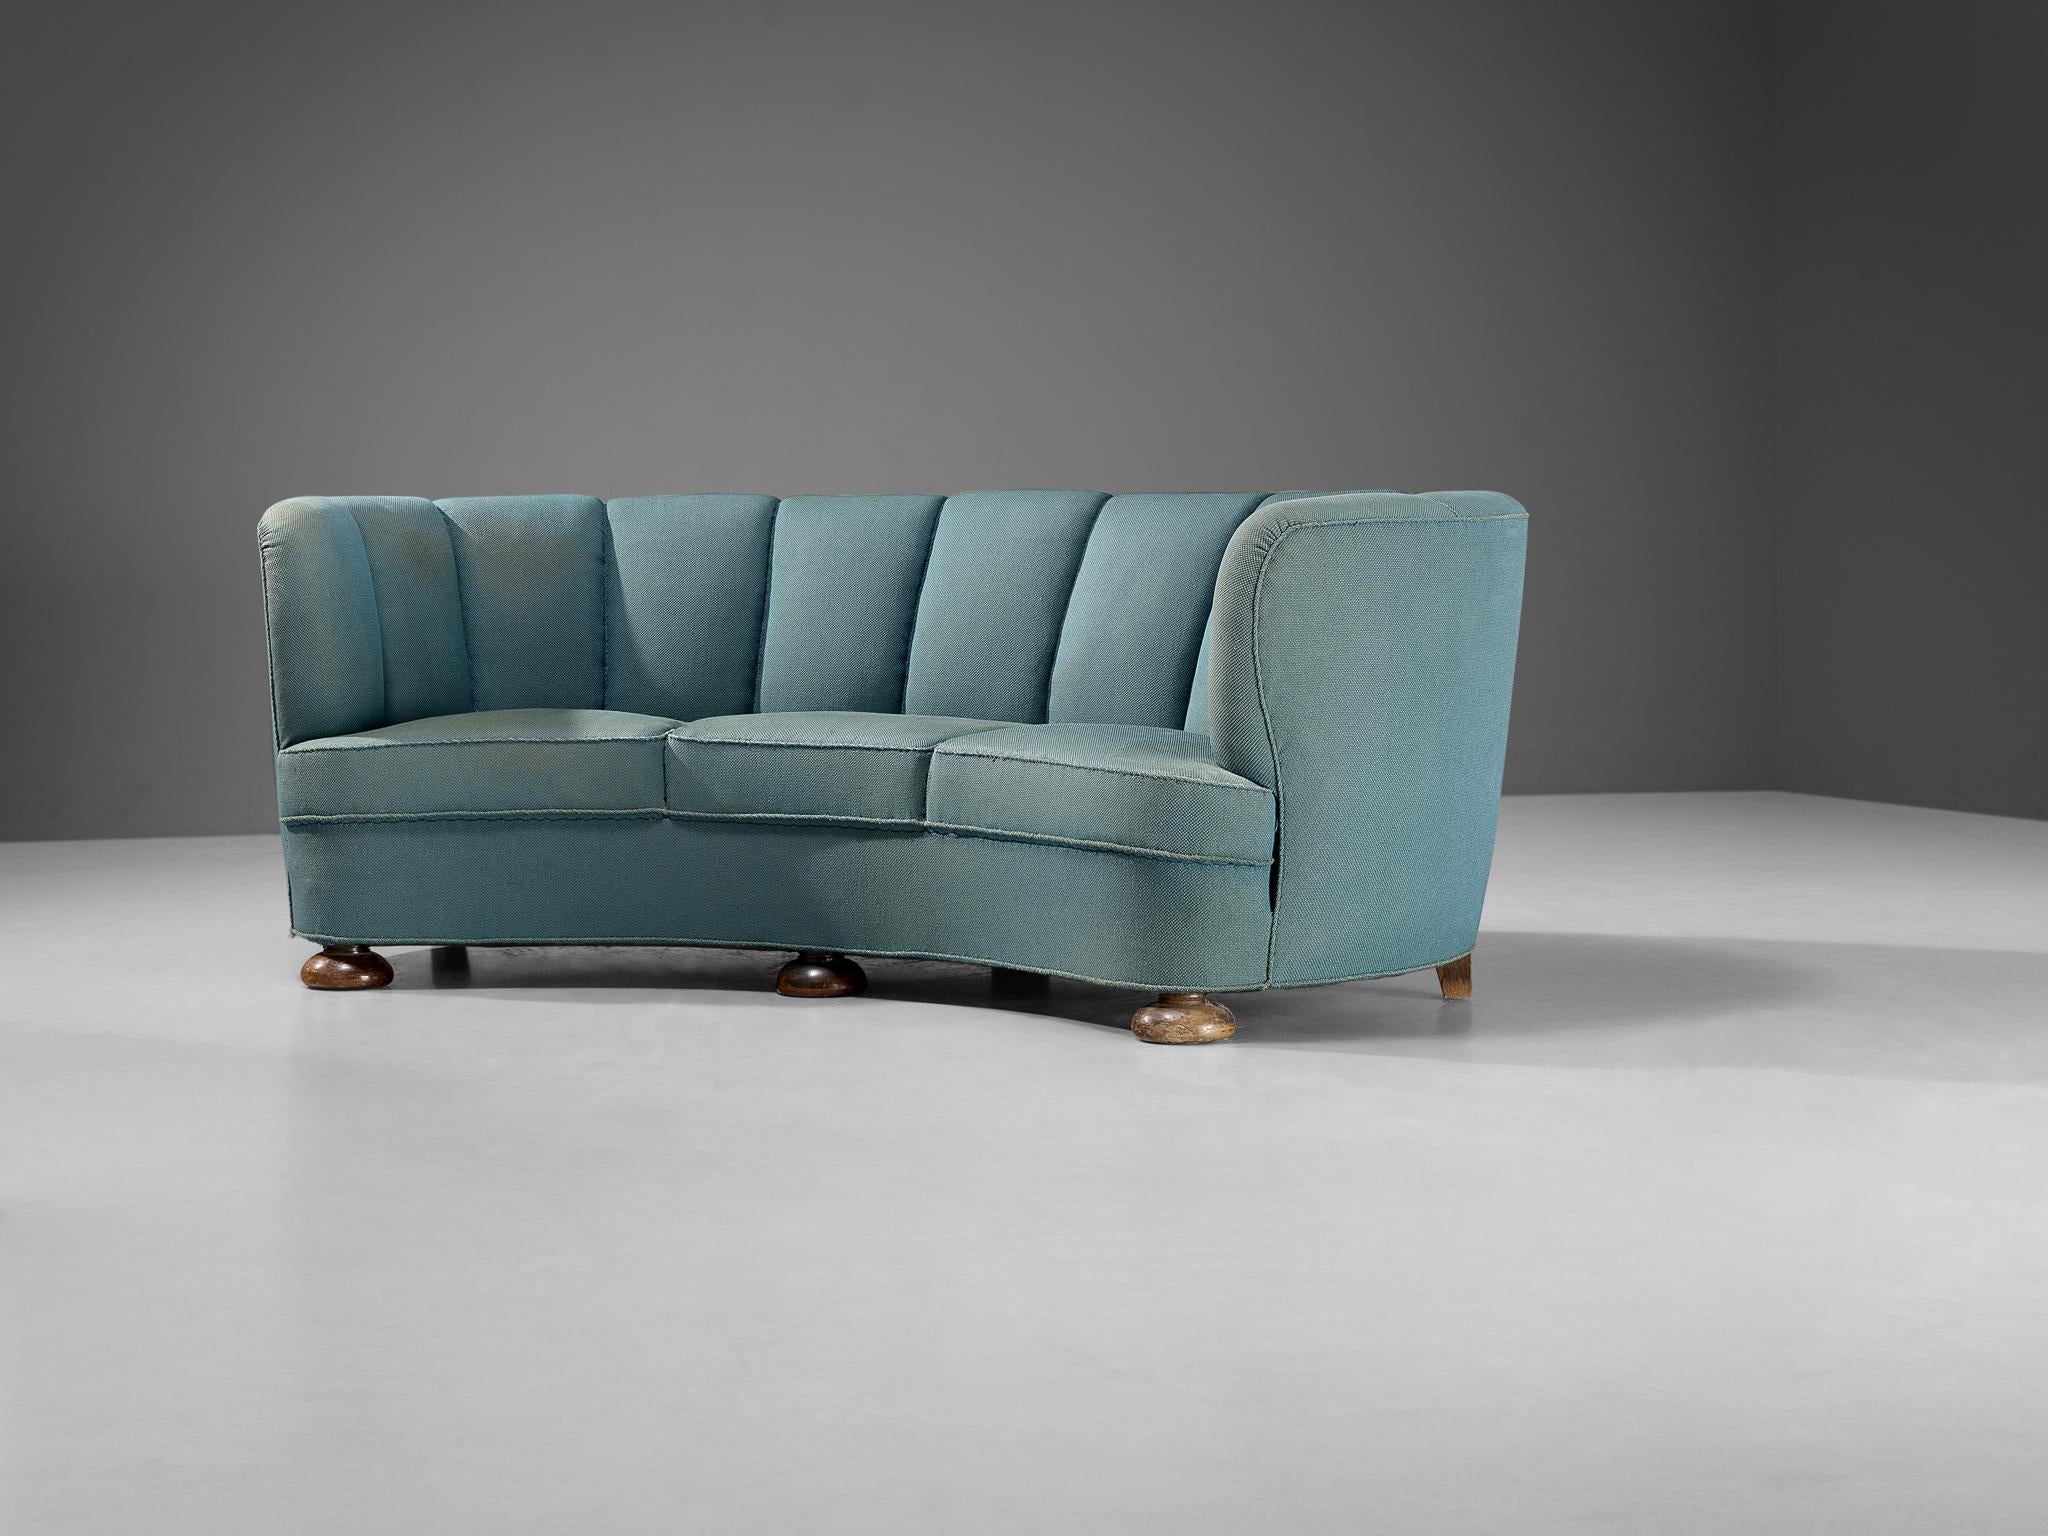 Mid-20th Century Danish Banana Sofa in Turquoise Upholstery  For Sale